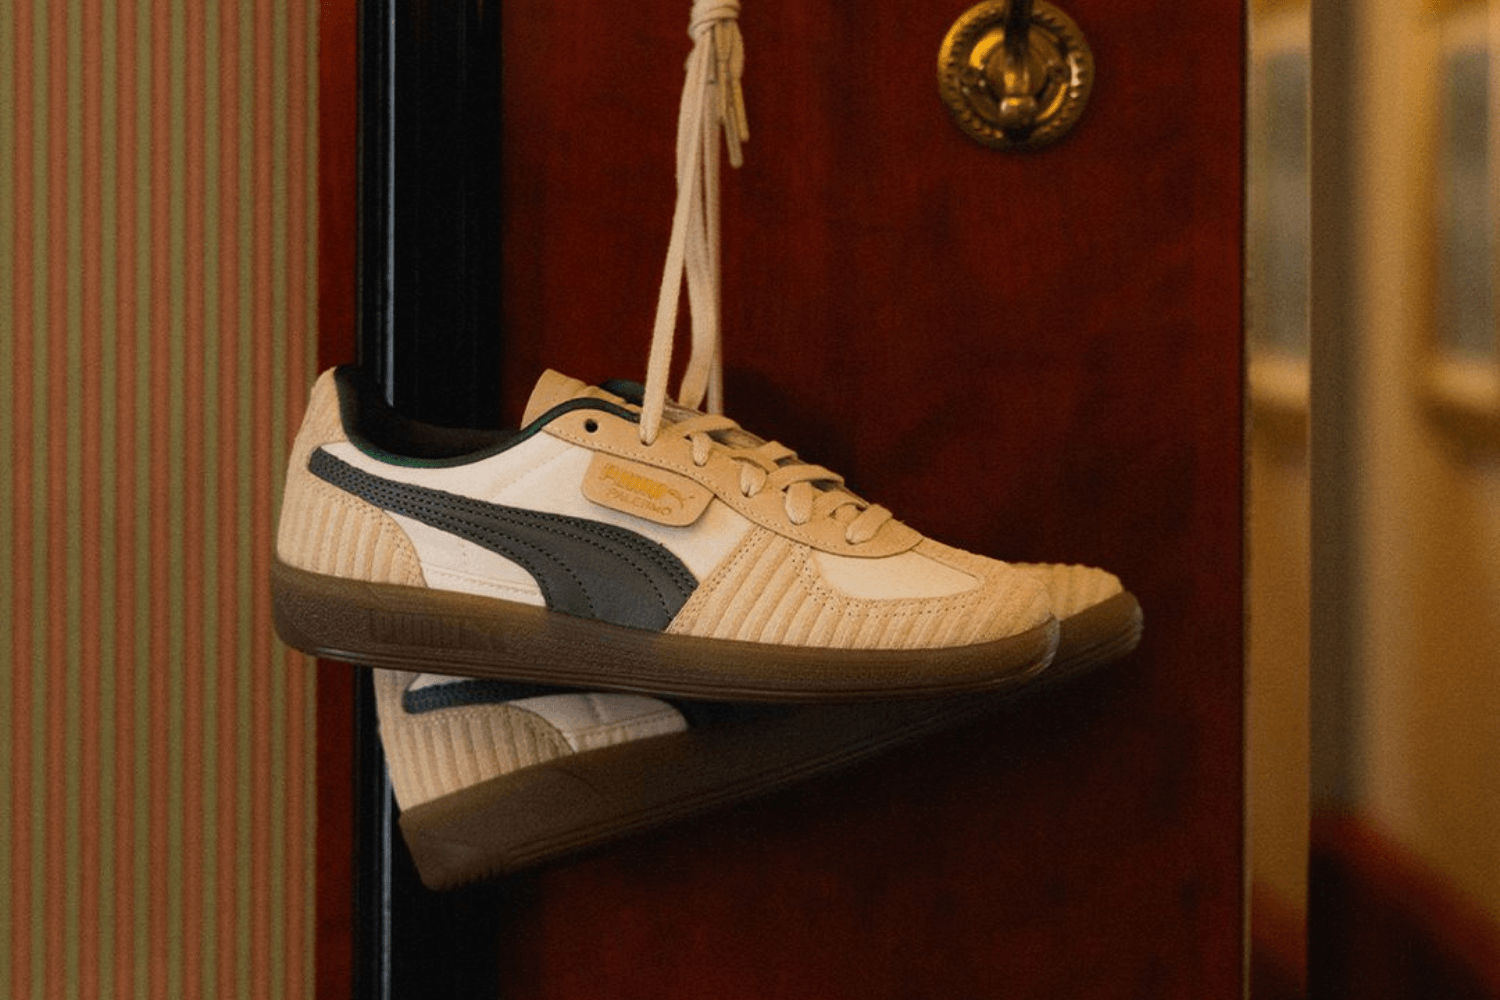 Asphaltgold and PUMA continue their Palermo story with the 'Sedia' colorway